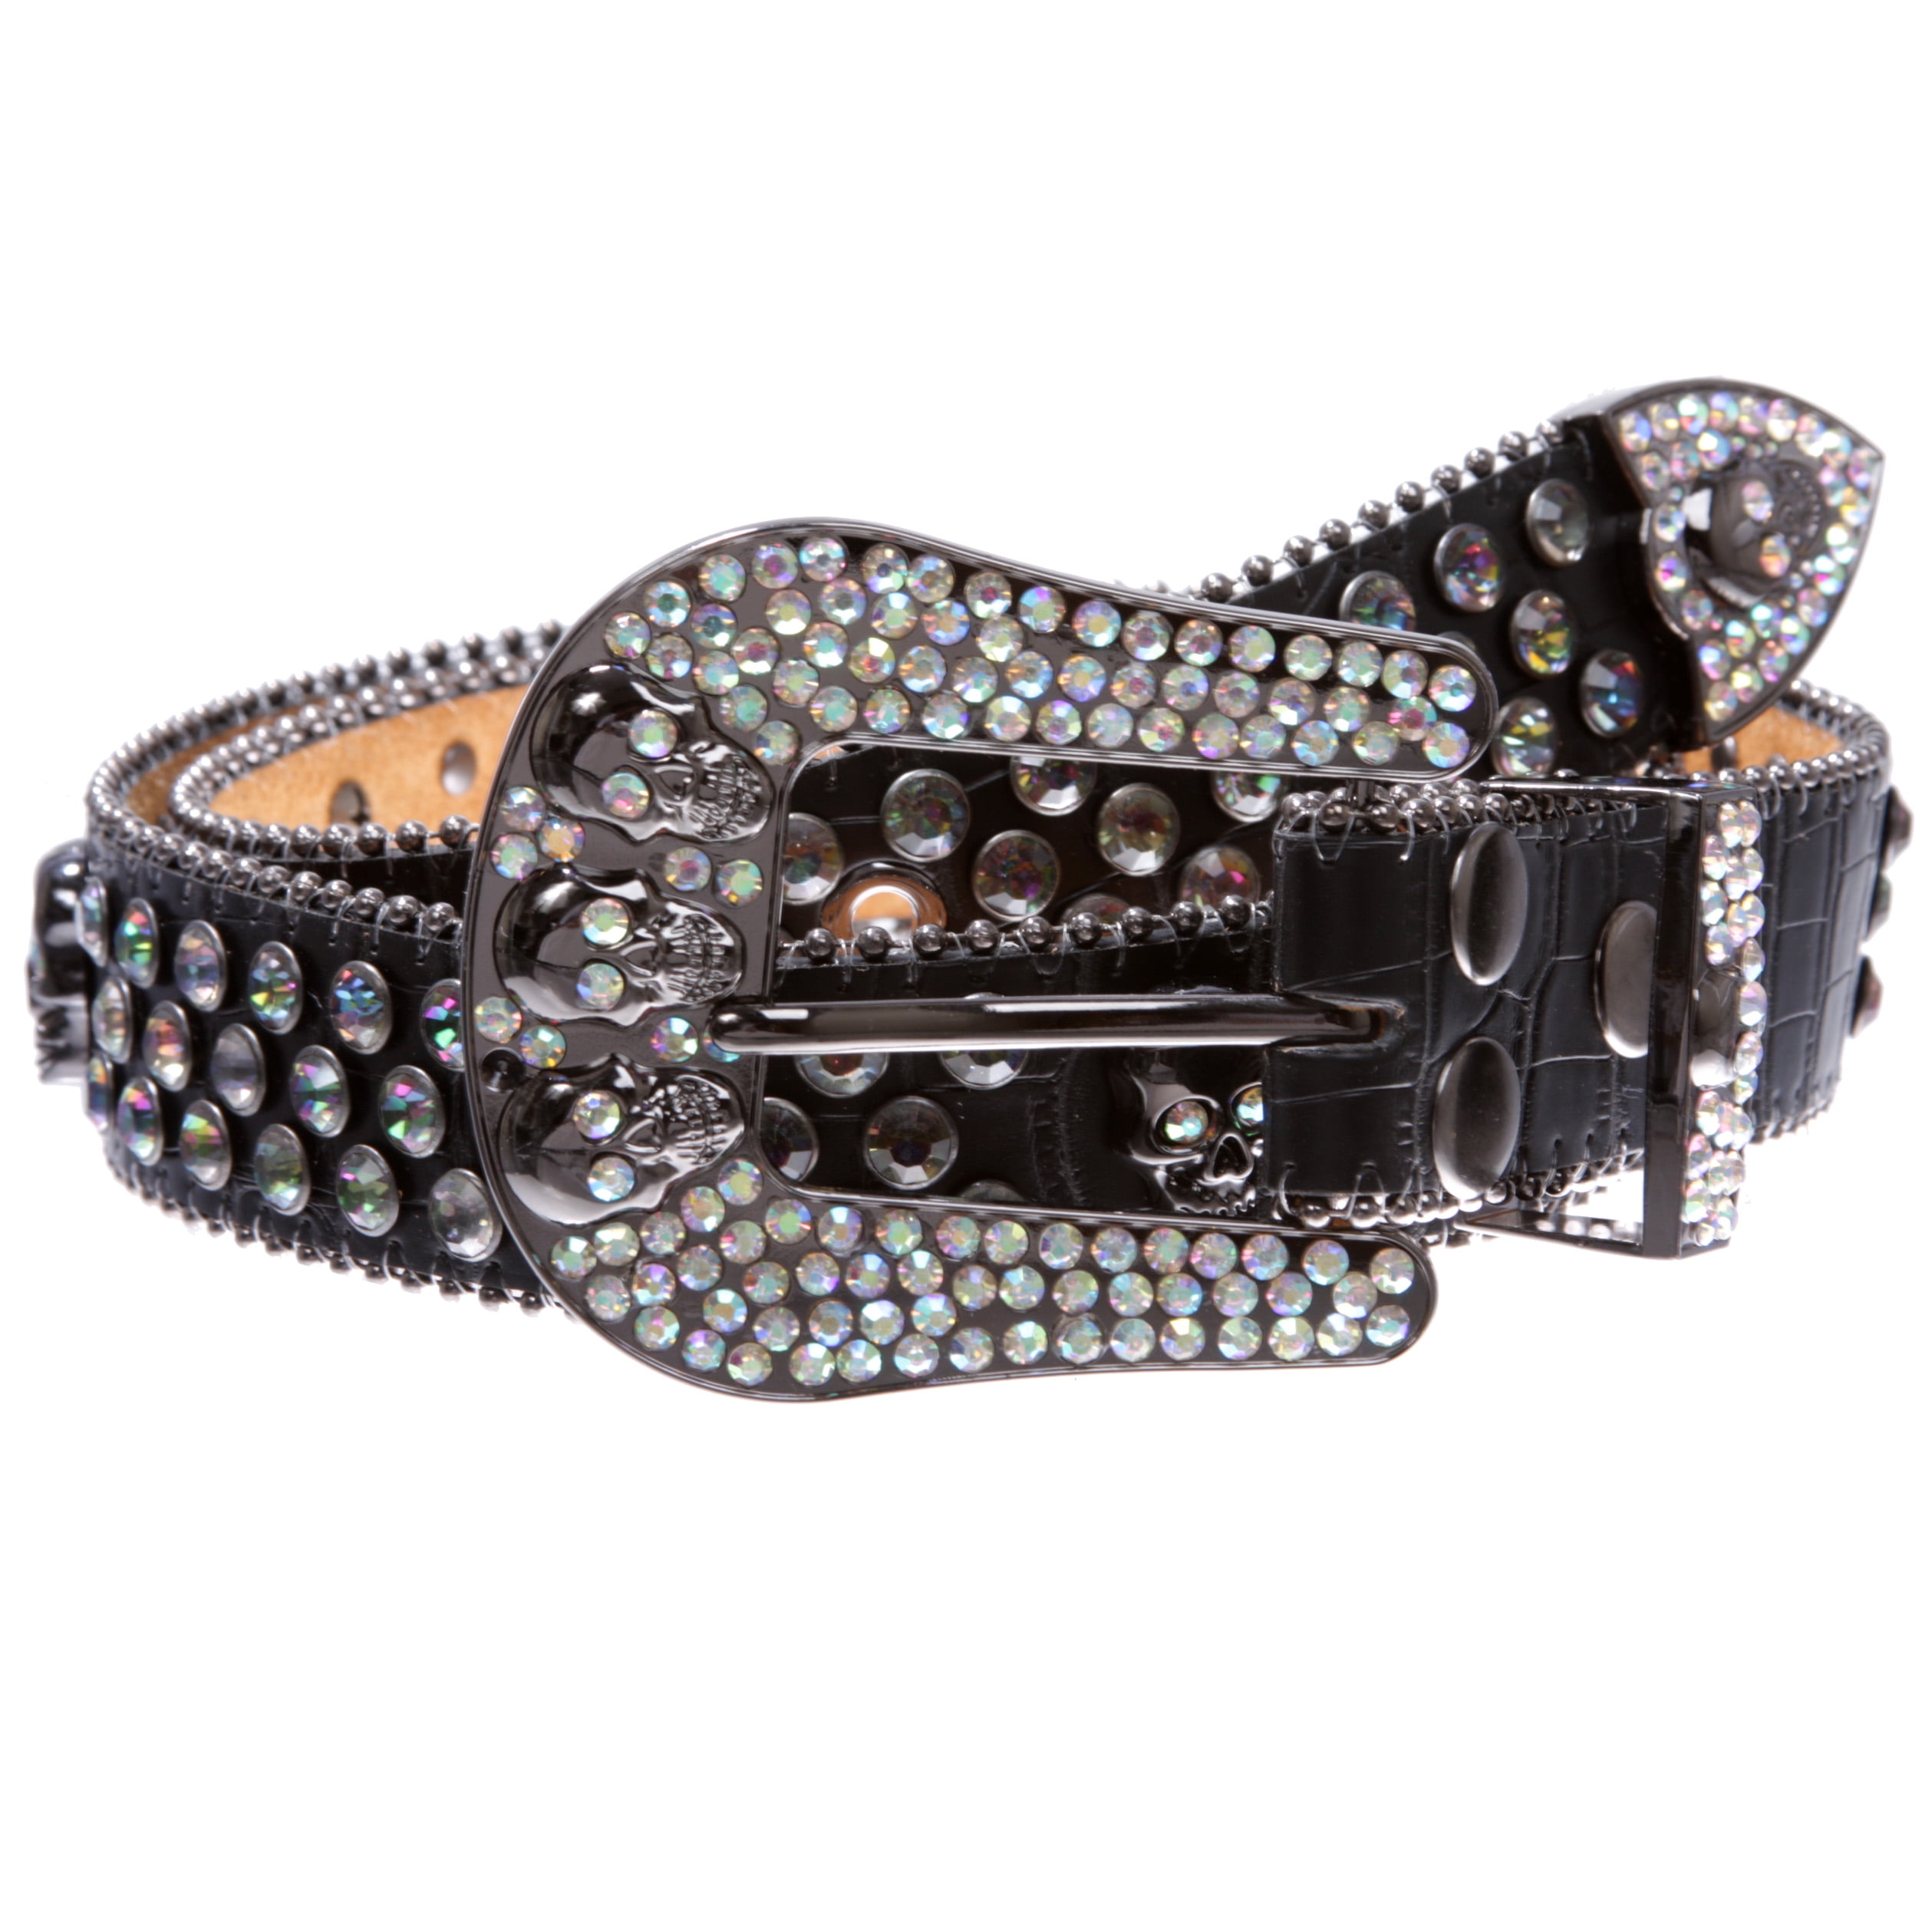 Cowboy Cowgirl Western Skull Rhinestone Bling Leather Belt for Men and ...